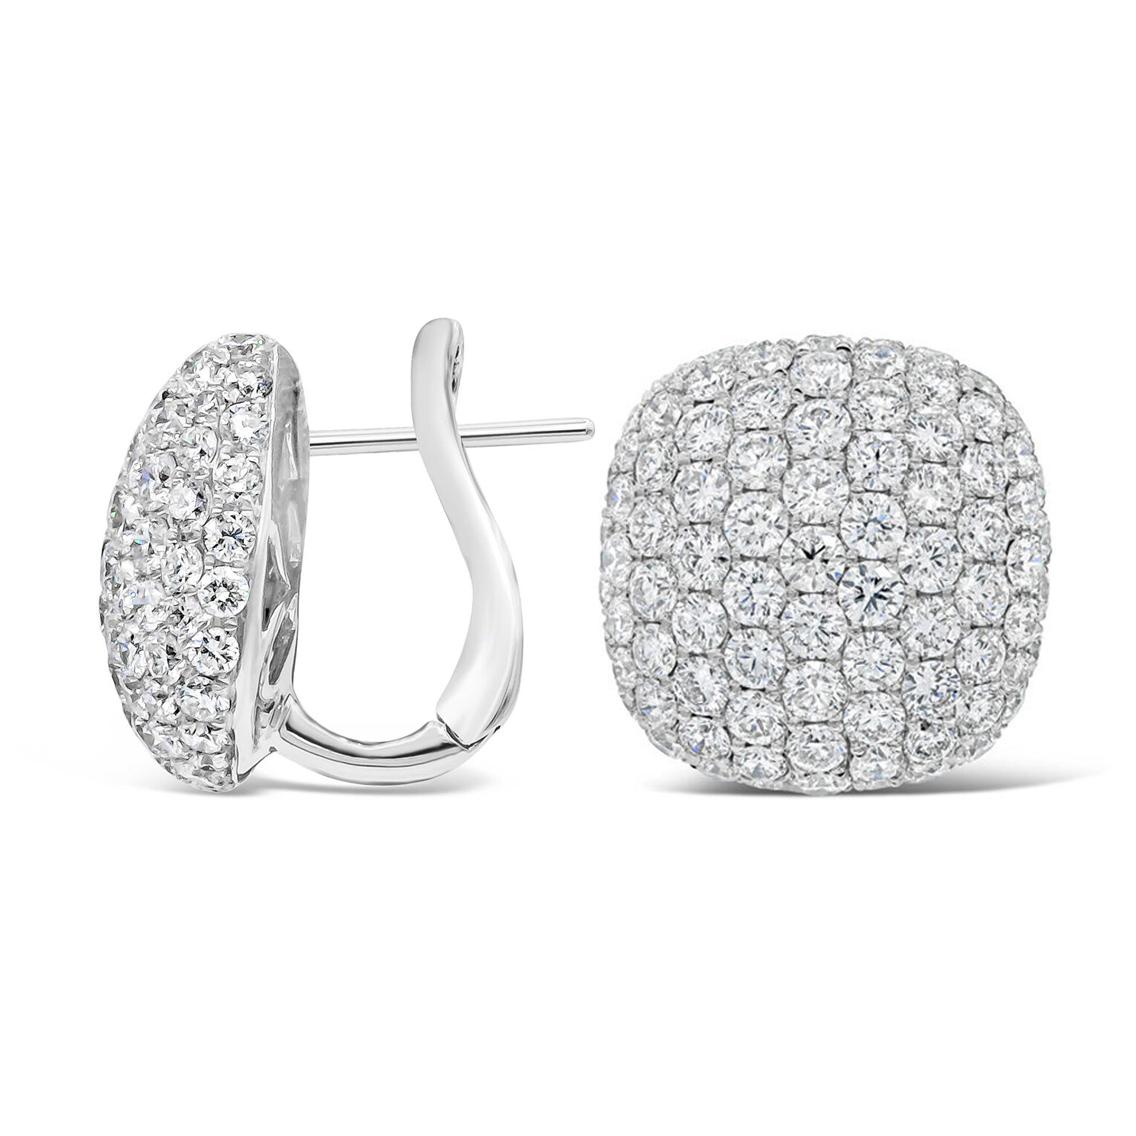 A lustrous and unique pair of earrings showcasing 5.52 carats total of 170 pieces brilliant round diamonds, micro-pave set in a cushion shape design. Made in 18K White Gold. Omega Clip with post.

Roman Malakov is a custom house, specializing in